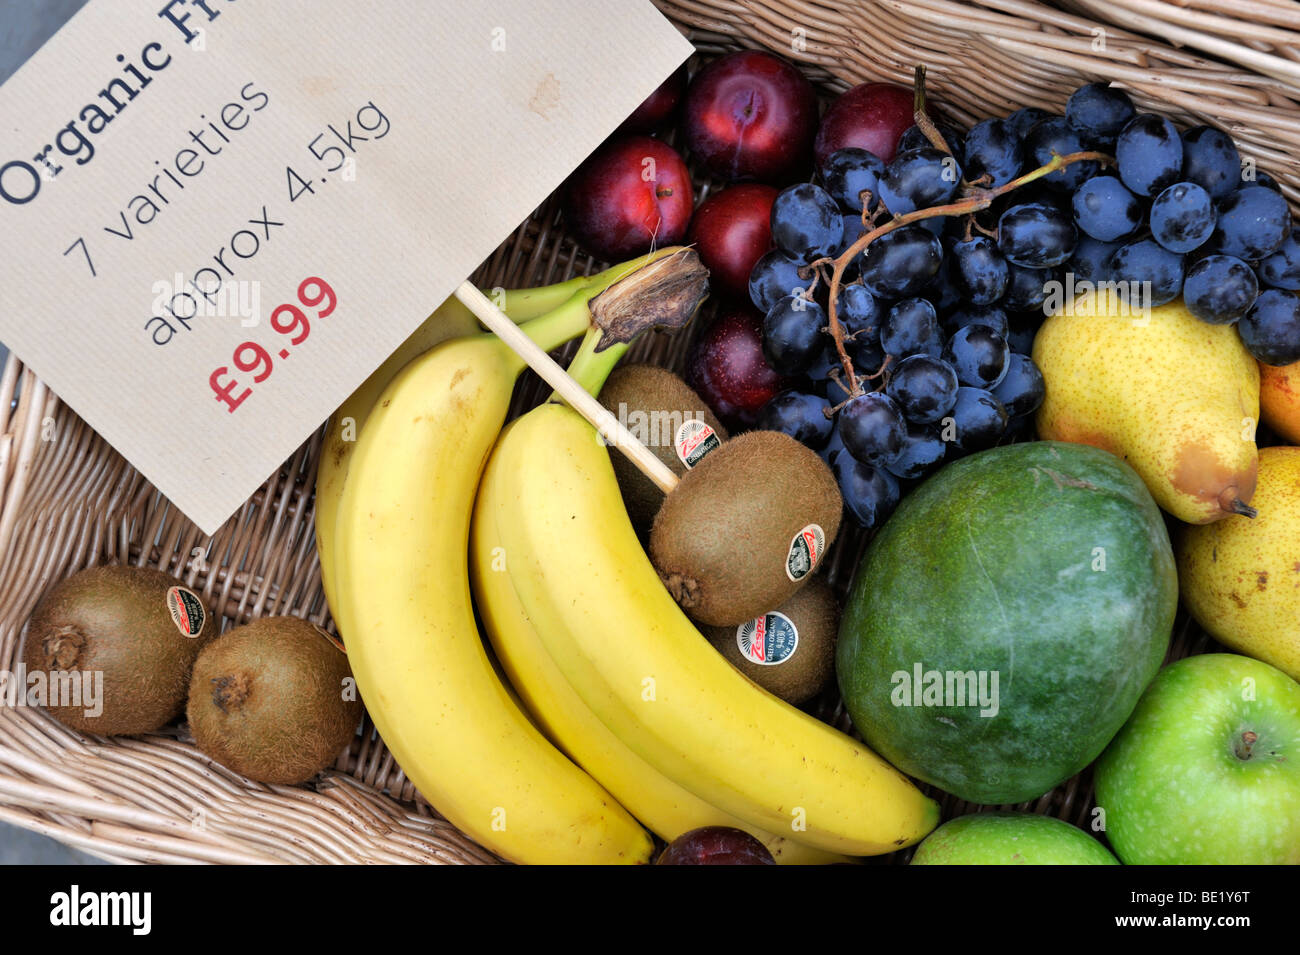 Organic fruit box for home delivery service Stock Photo